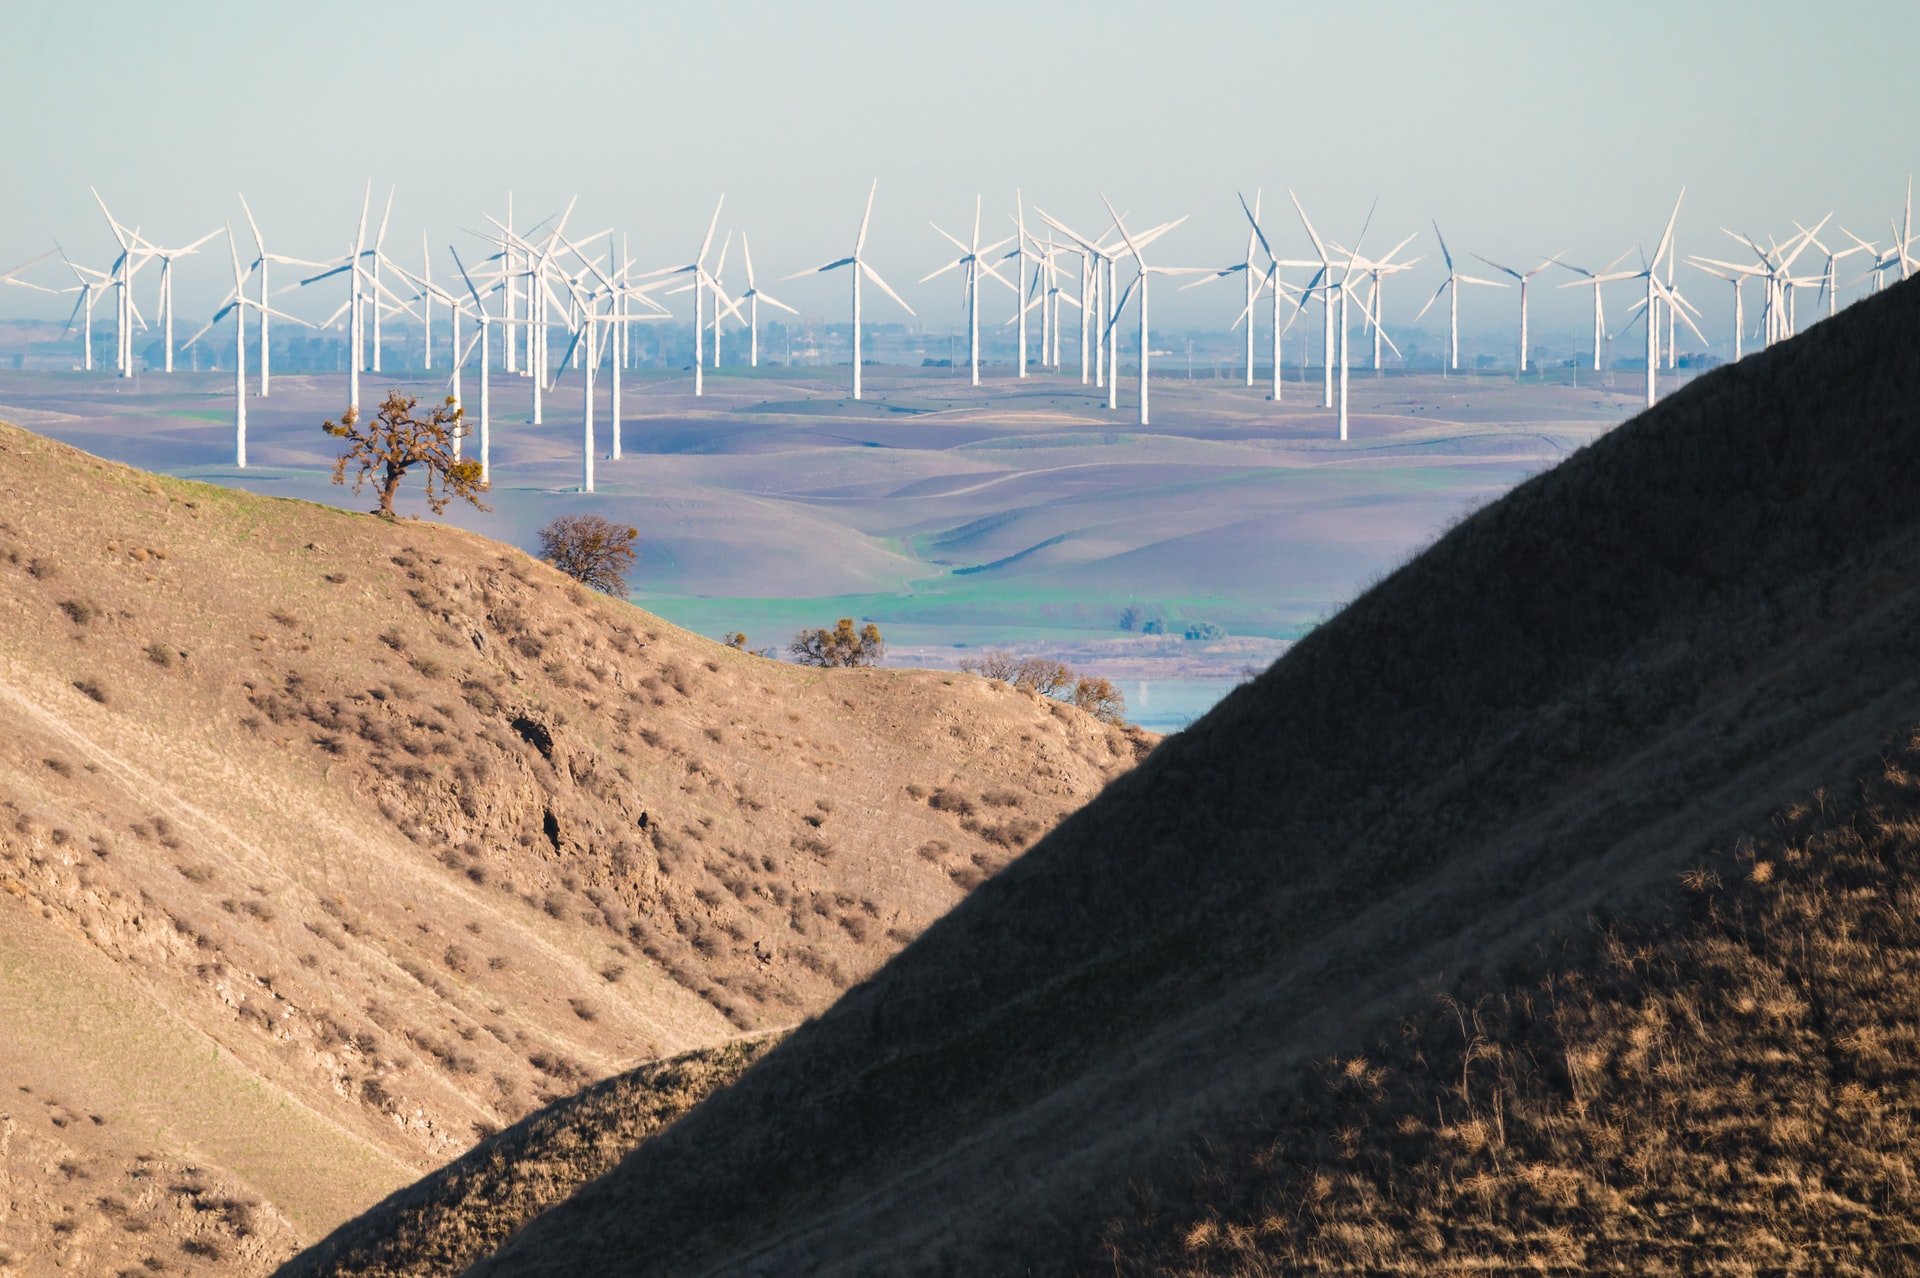 The US also set a major renewable energy milestone last month: wind power was the country's second-highest source of electricity, edging out nuclear and coal for the first time since the EIA began gathering the data. Read the full story ?